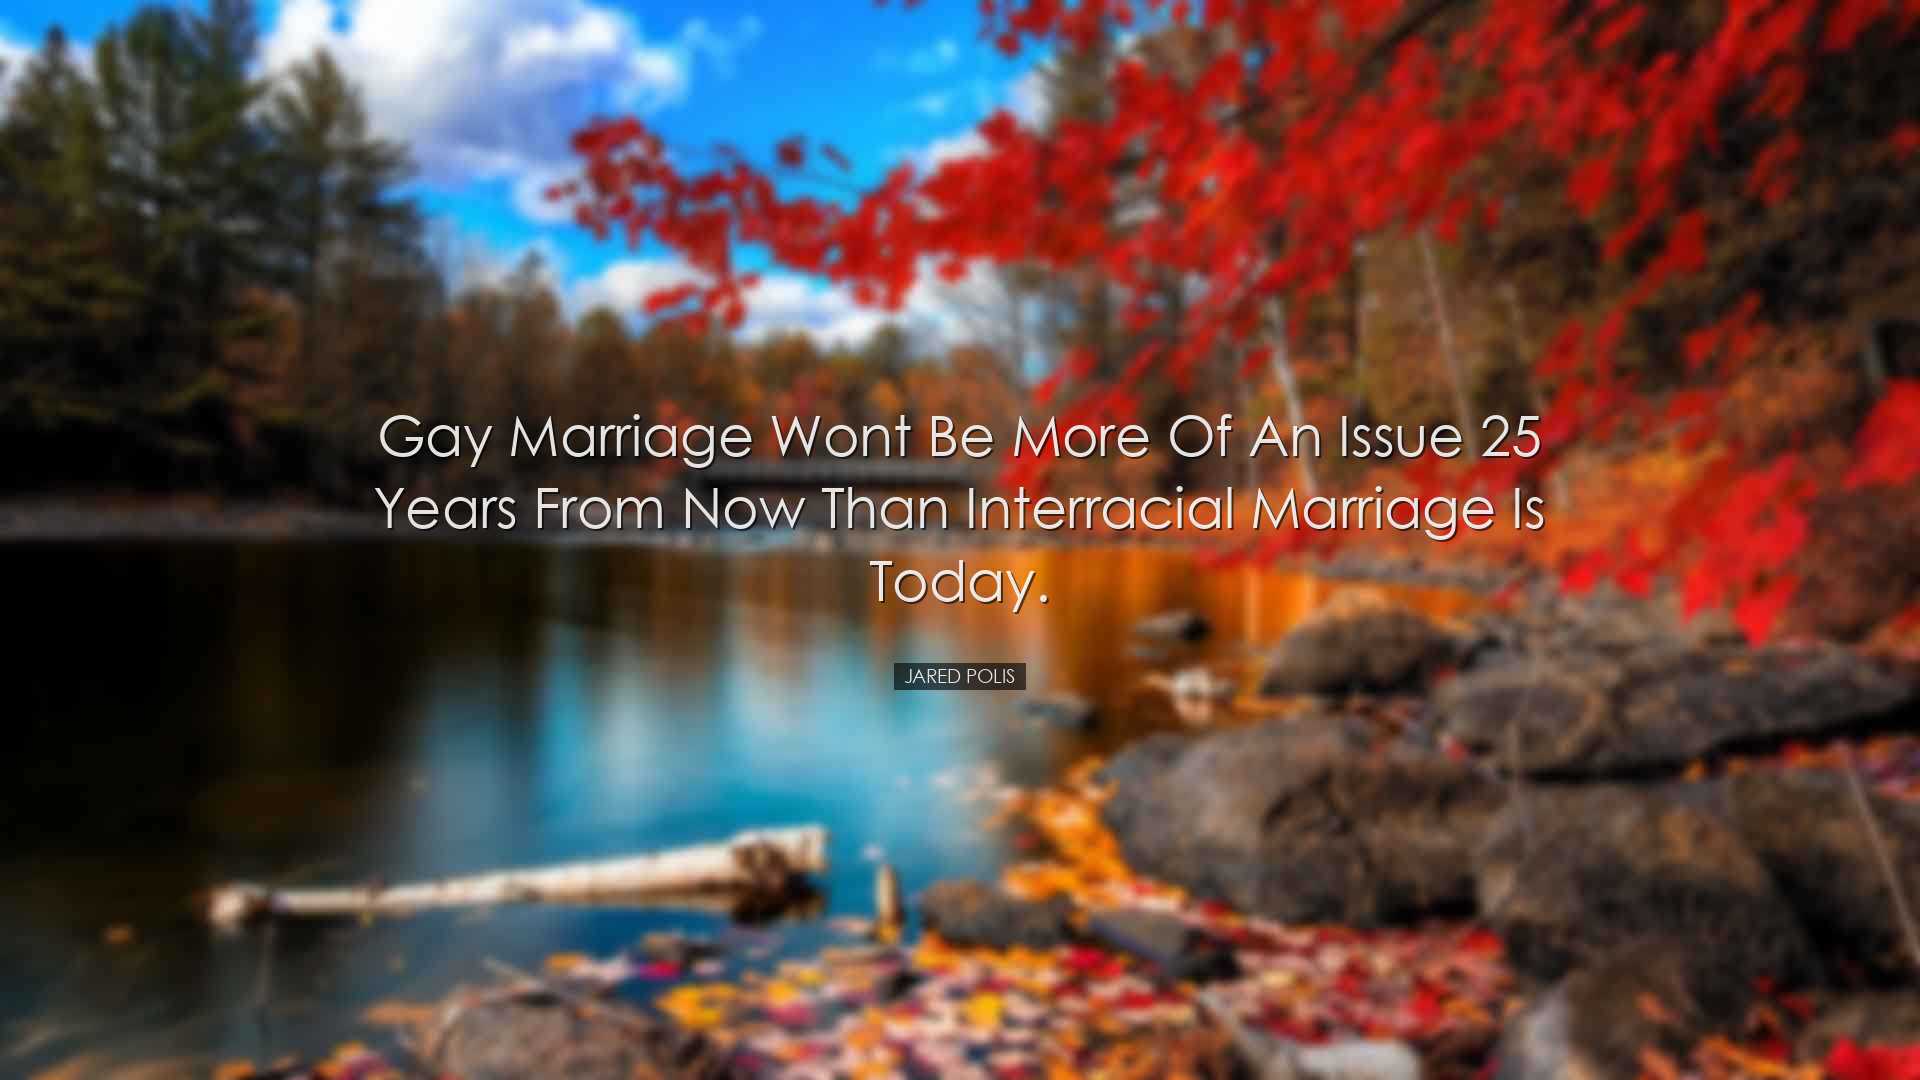 Gay marriage wont be more of an issue 25 years from now than inter